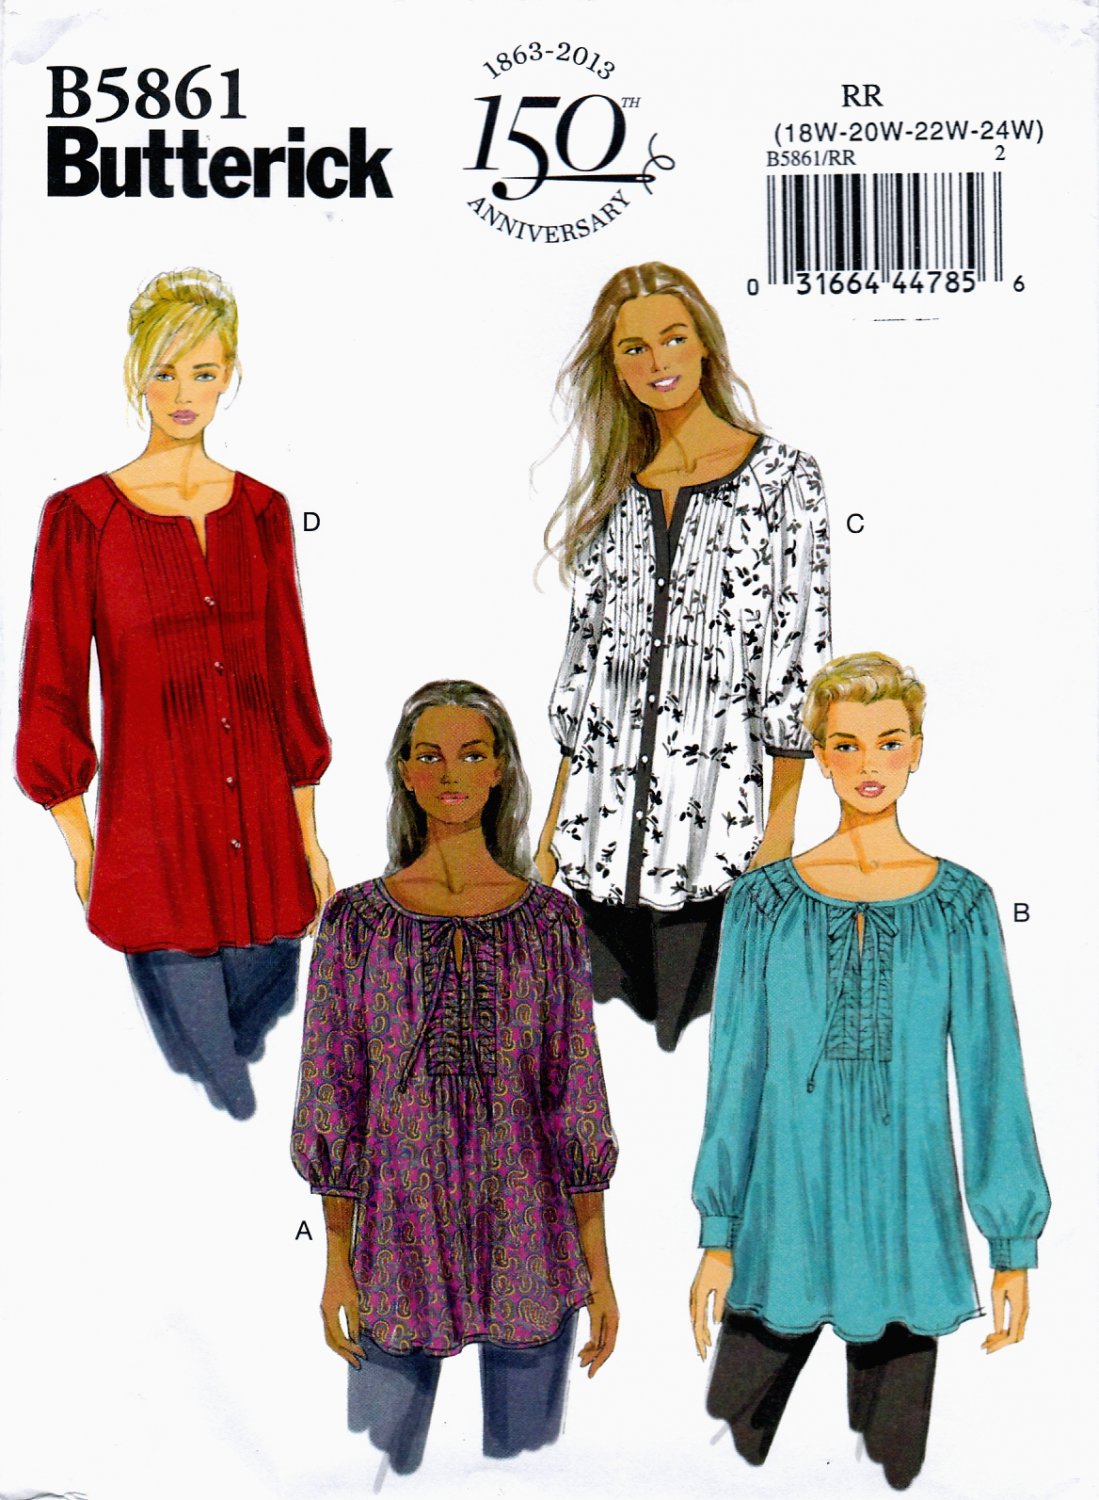 Butterick B5861 Misses Womens Tunics Varying Styles Sewing Pattern Sizes 18W-20W-22W-24W